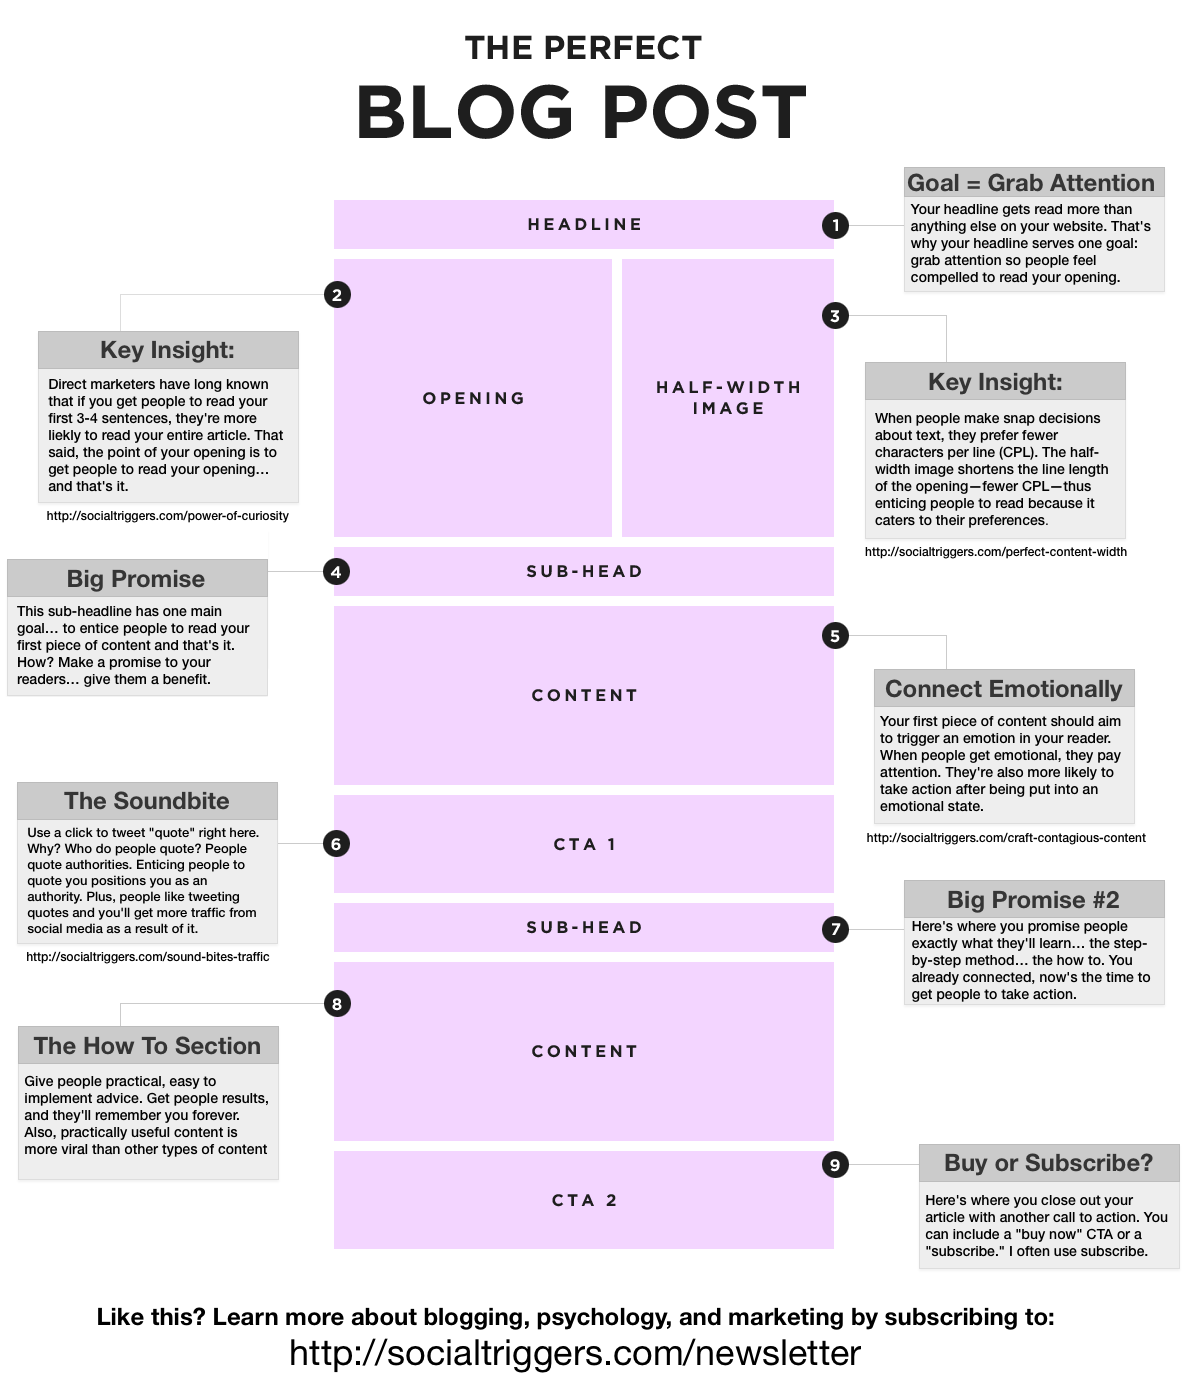 Is This The Perfect Blog Post? [INFOGRAPHIC]